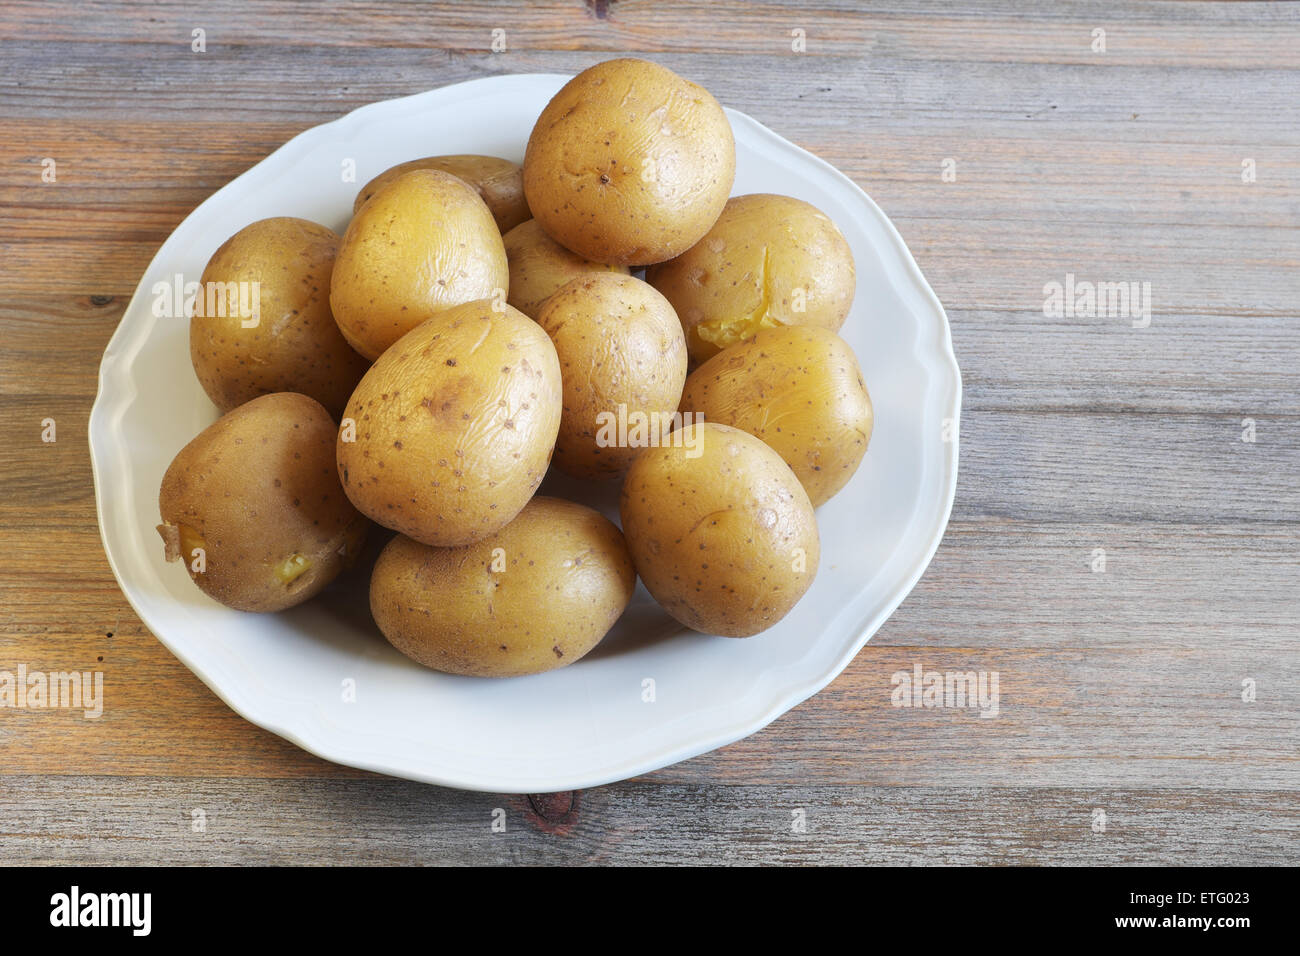 boiled potatoes in their skins on a plate, wooden background Stock Photo